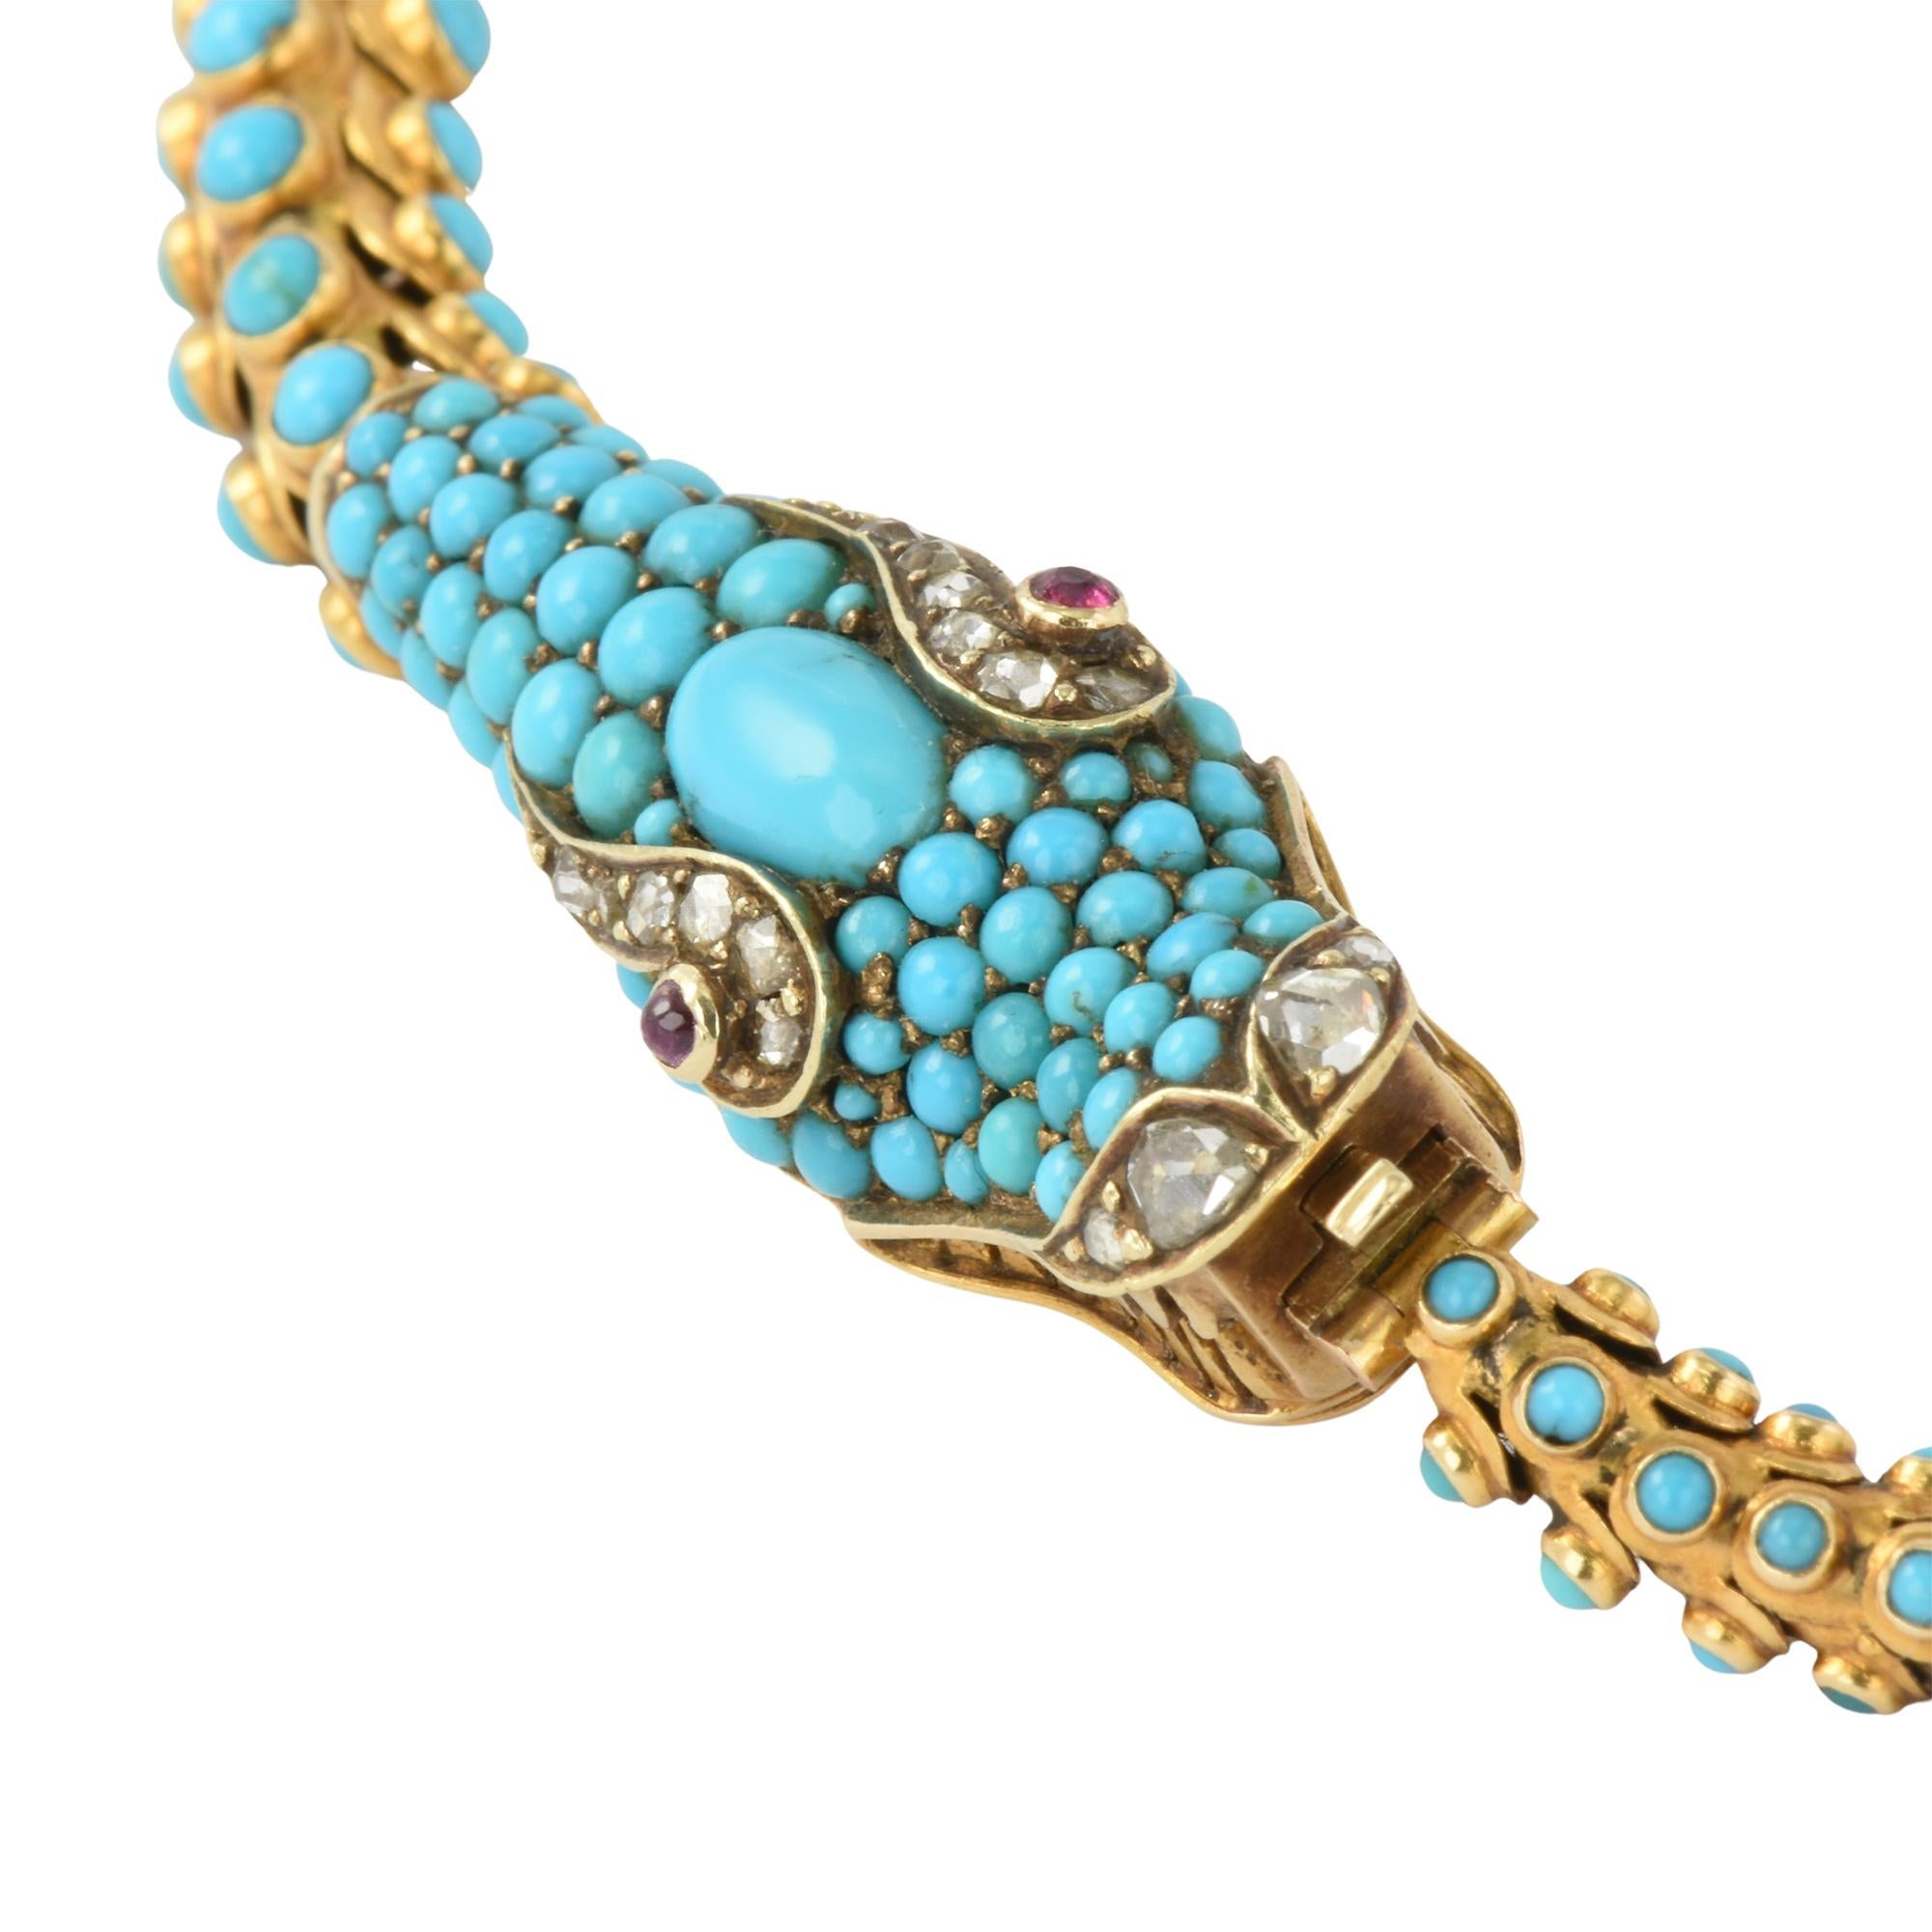 Cabochon Victorian 15k Gold & Turquoise Snake Necklace, circa 1860 For Sale